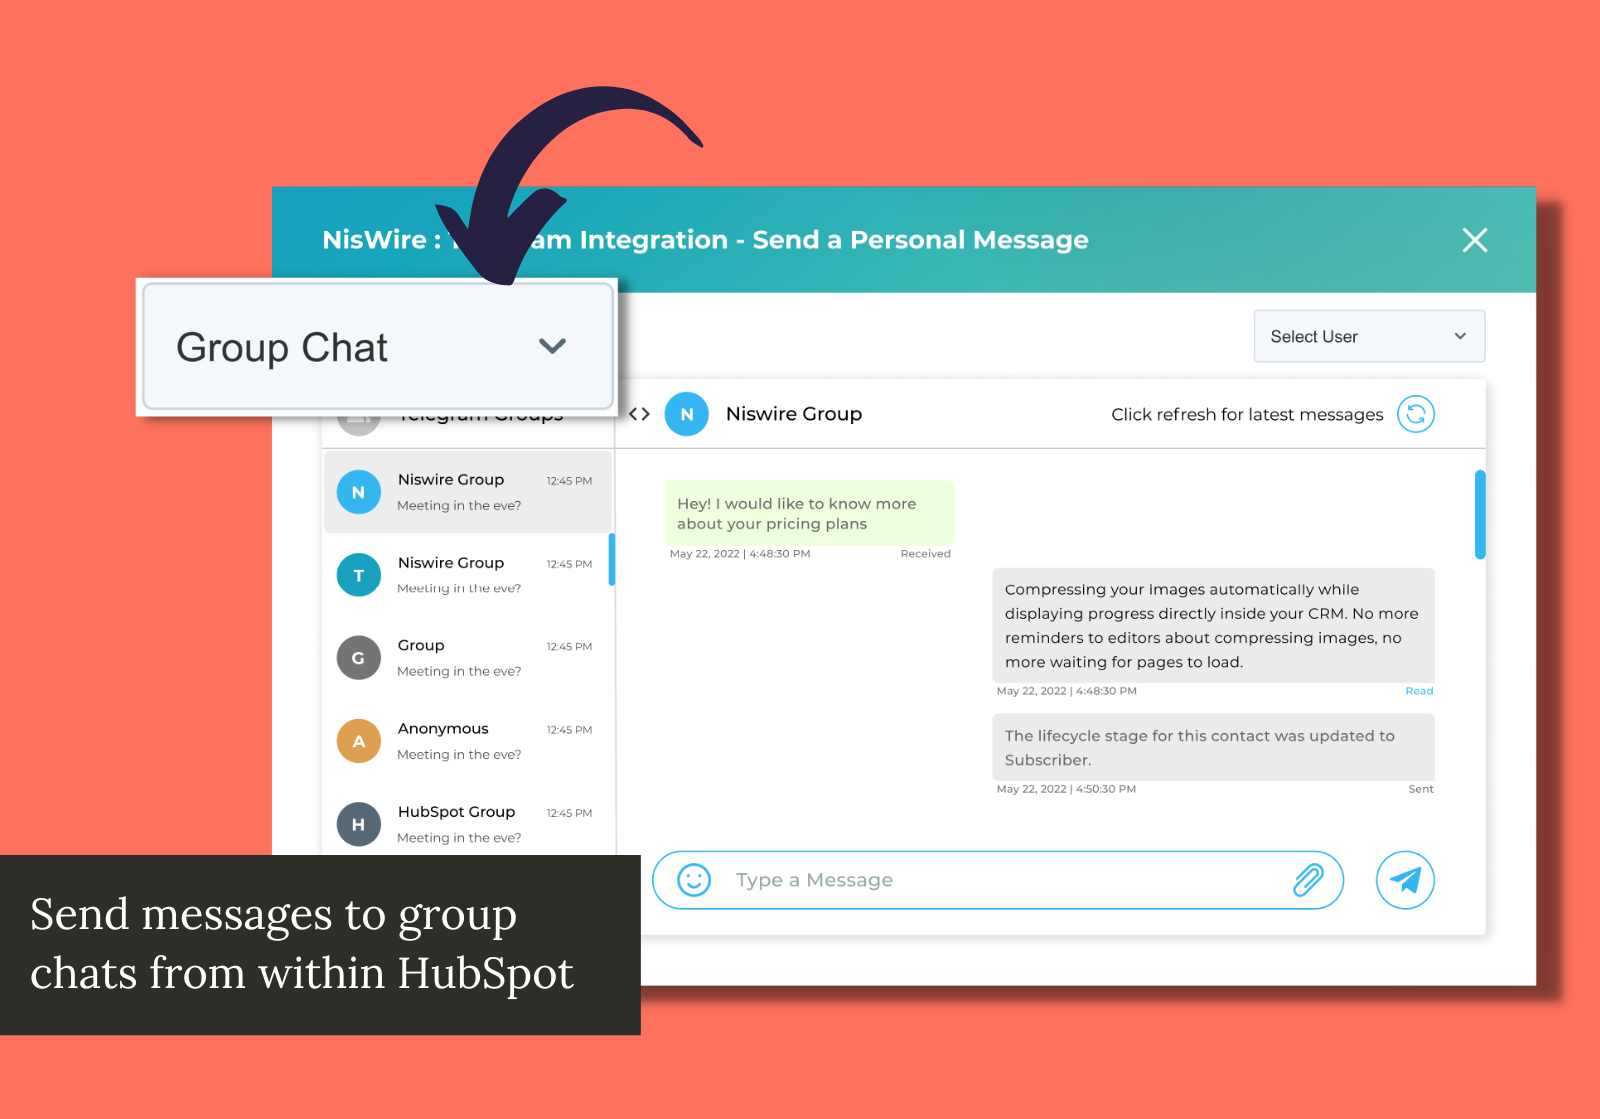 View and Send Messages in Group Chats